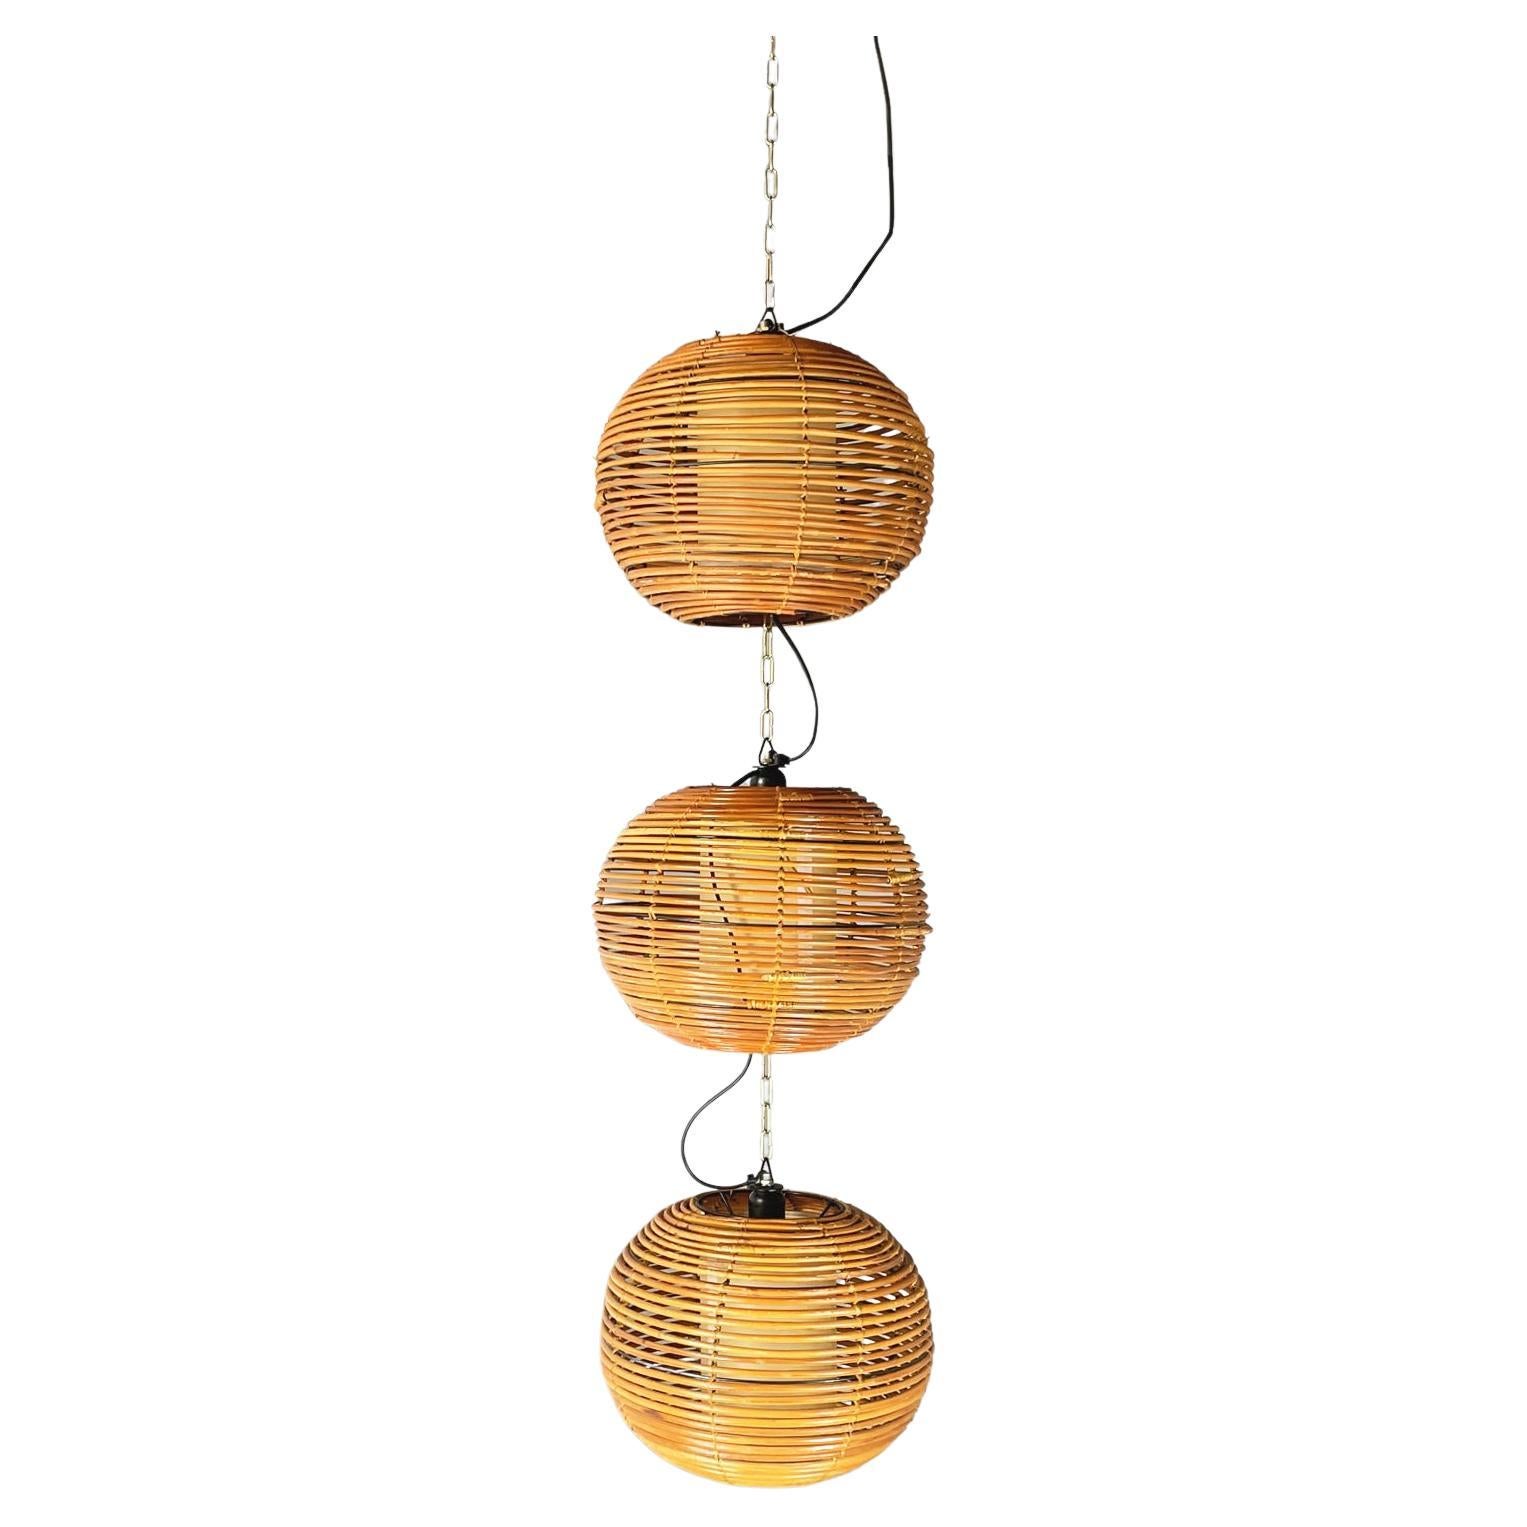 Italian Mid-Century Modern Rattan Chandelier with 3 Spherical Lampshade, 1960s